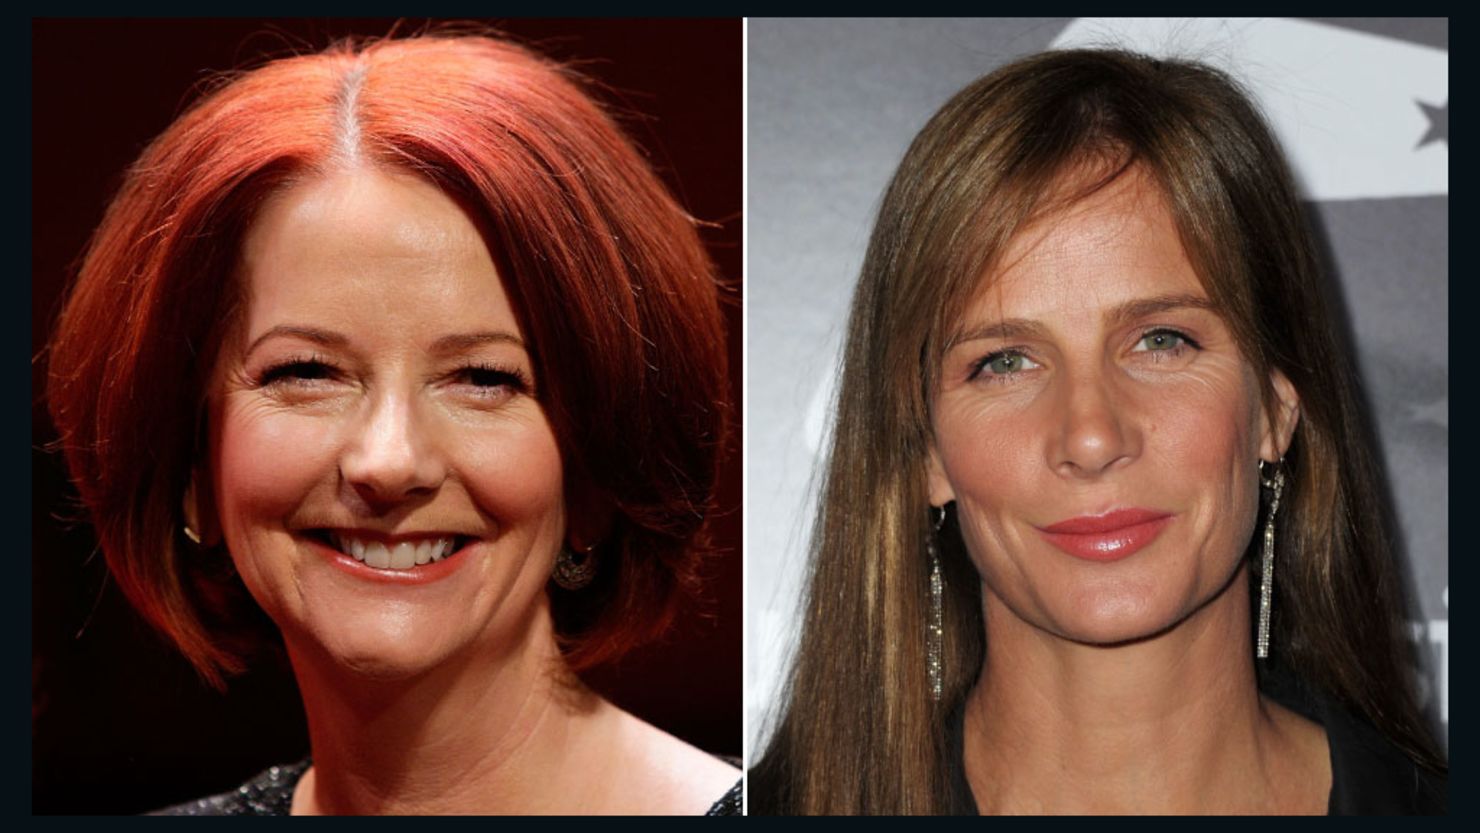 Australian actor Rachel Griffiths (pictured right) is set to play former Prime Minister Julia Gillard in a new drama, based on a book by political journalist Kerry-Anne Walsh. 